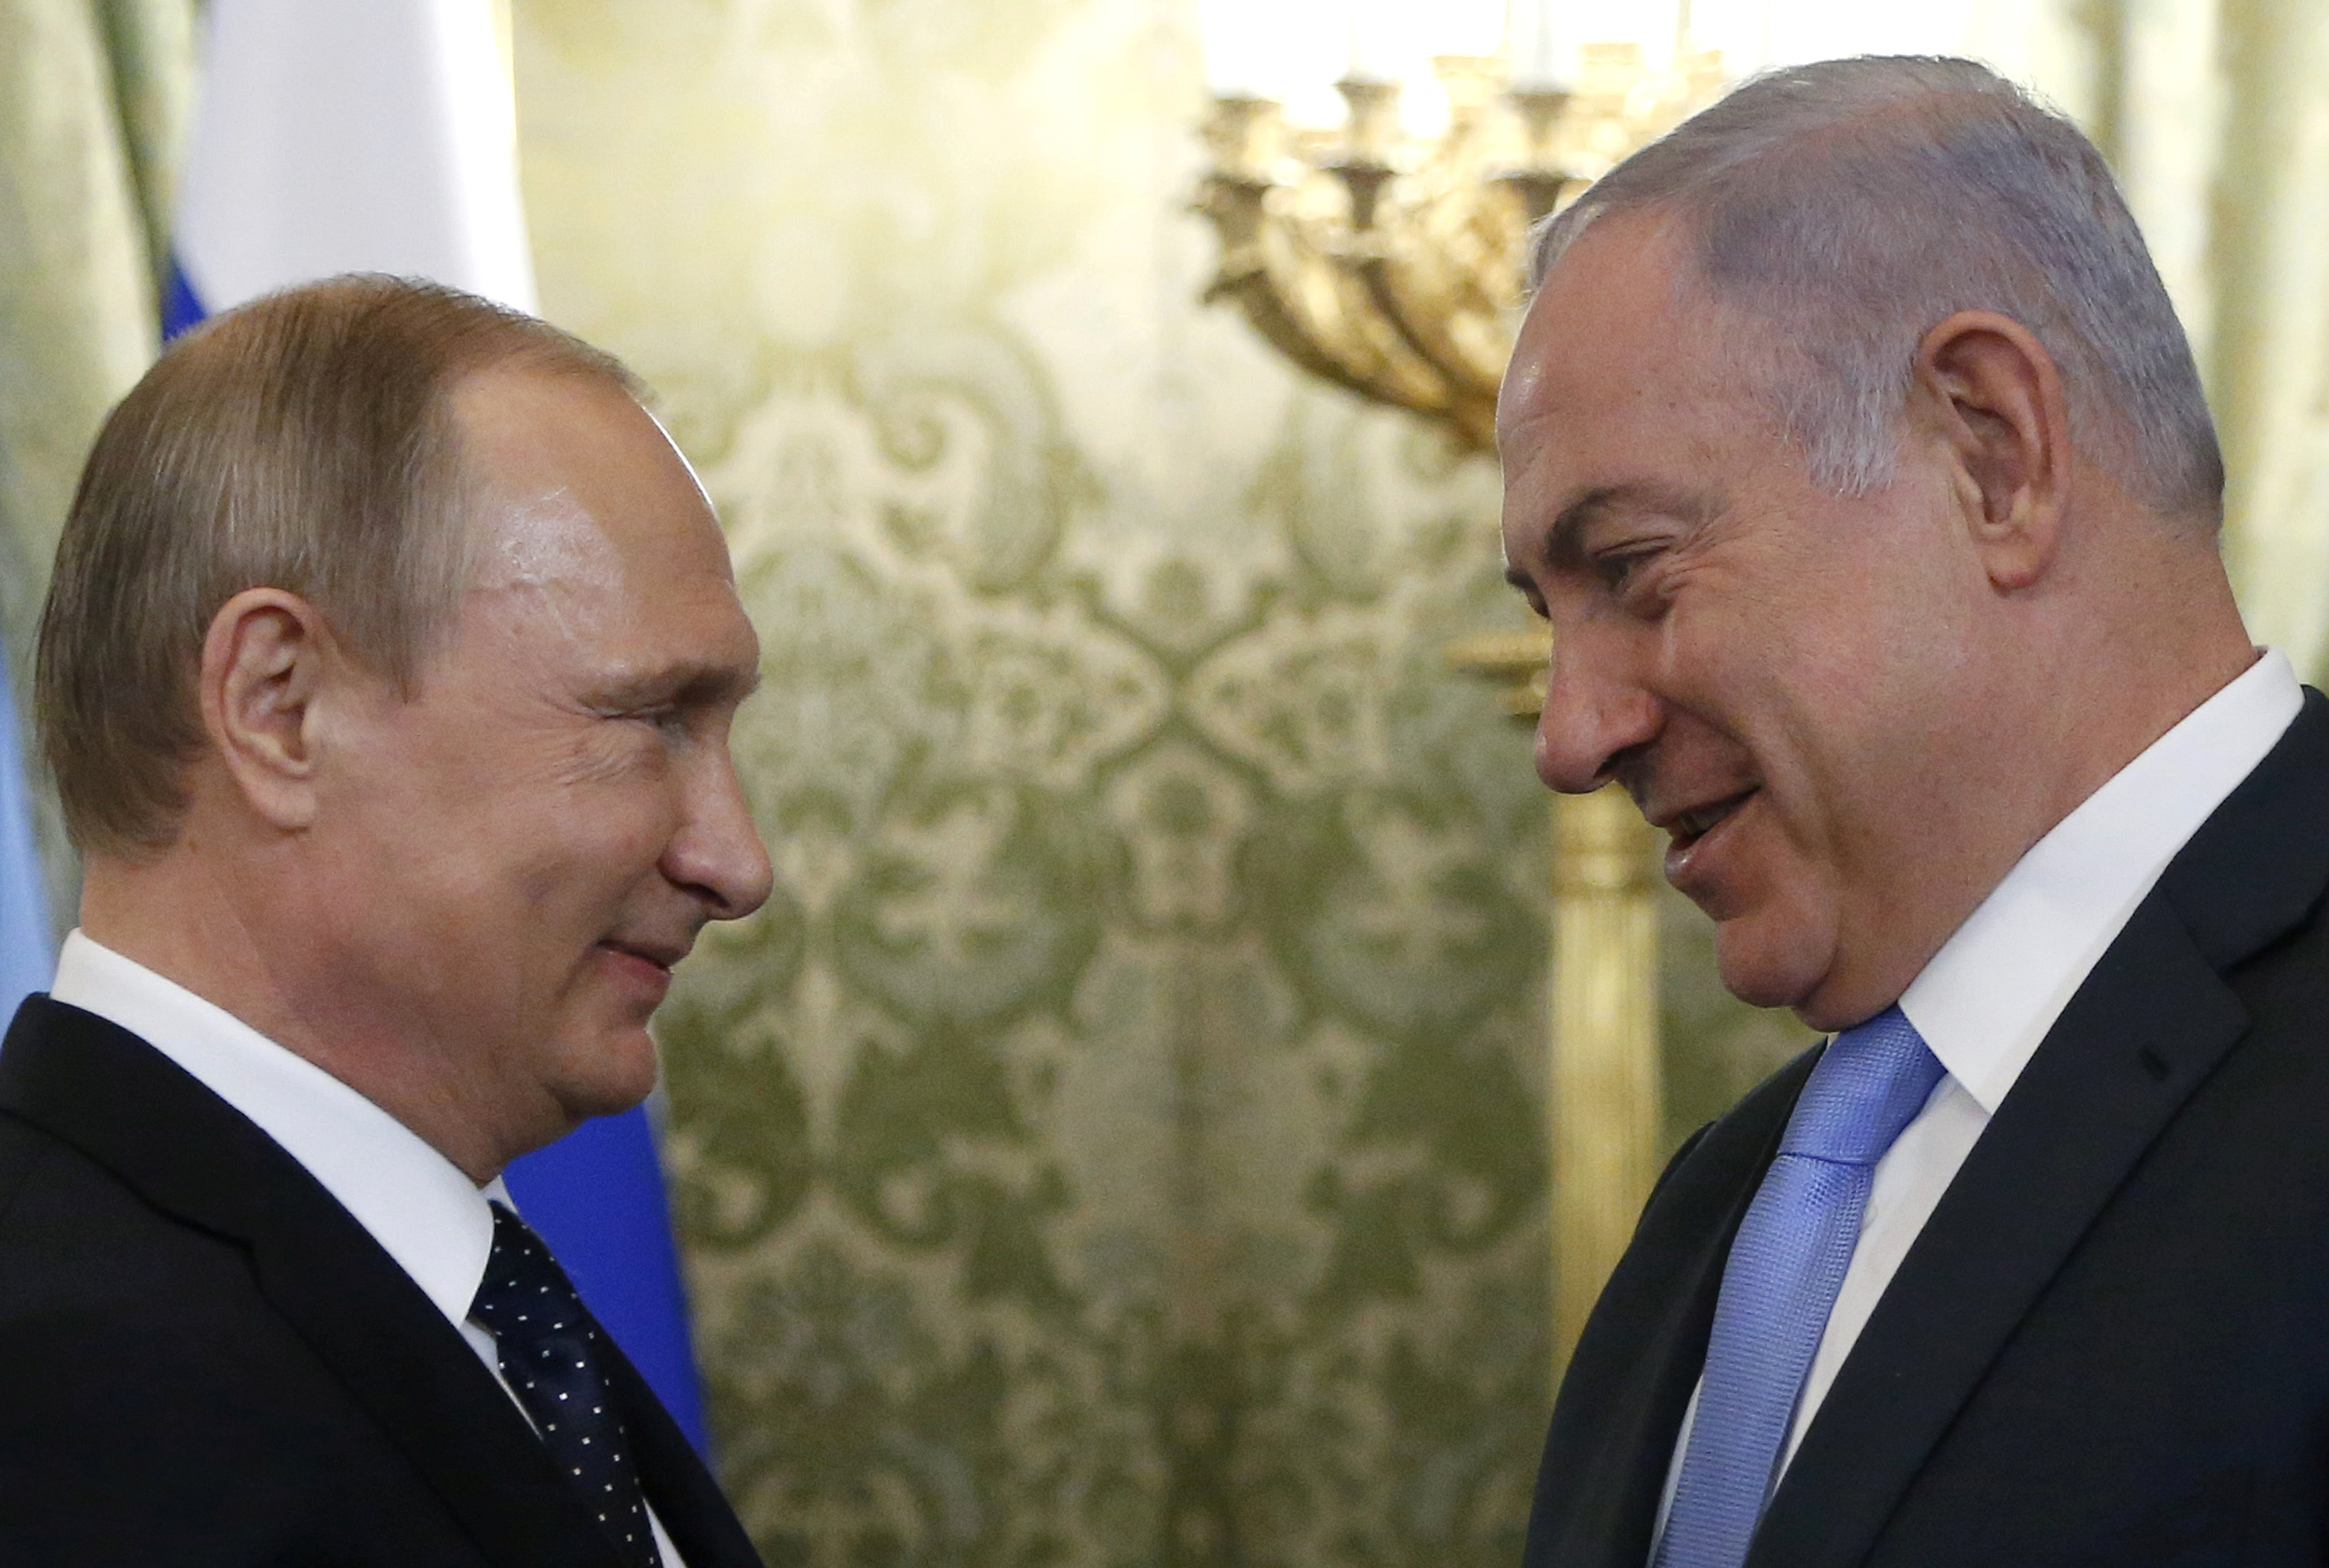 Israel Wants Russia and U.S. to Know It Can Wreck Syria Deal